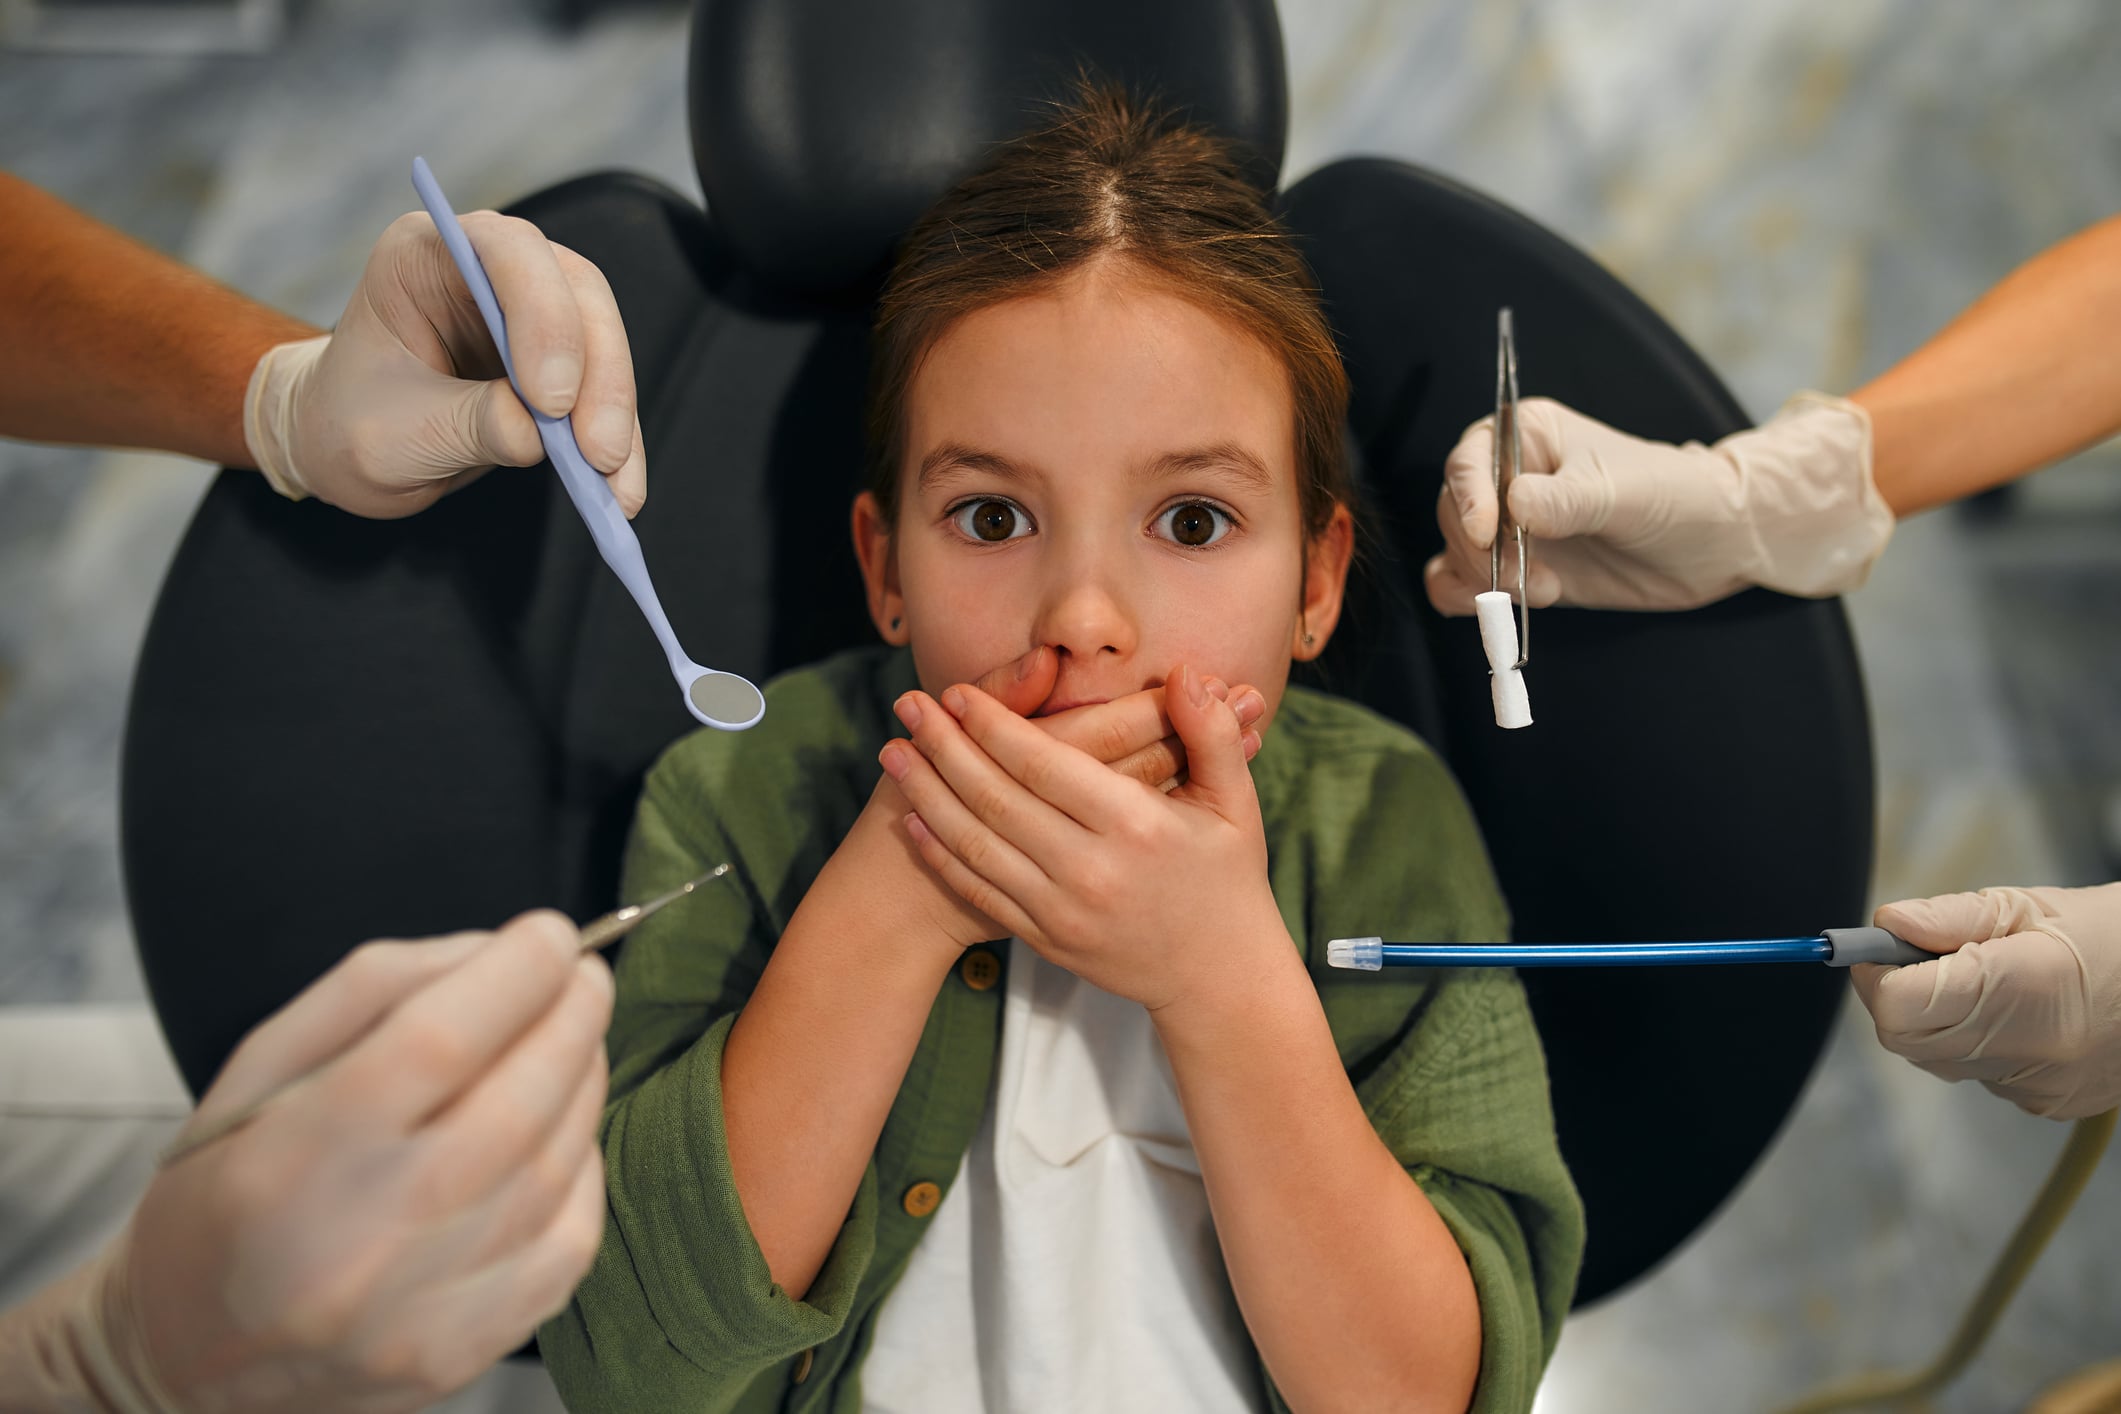 Pleasant little girl lying in a dentist chair and covering her mouth, being afraid of the checkup at the dentists.